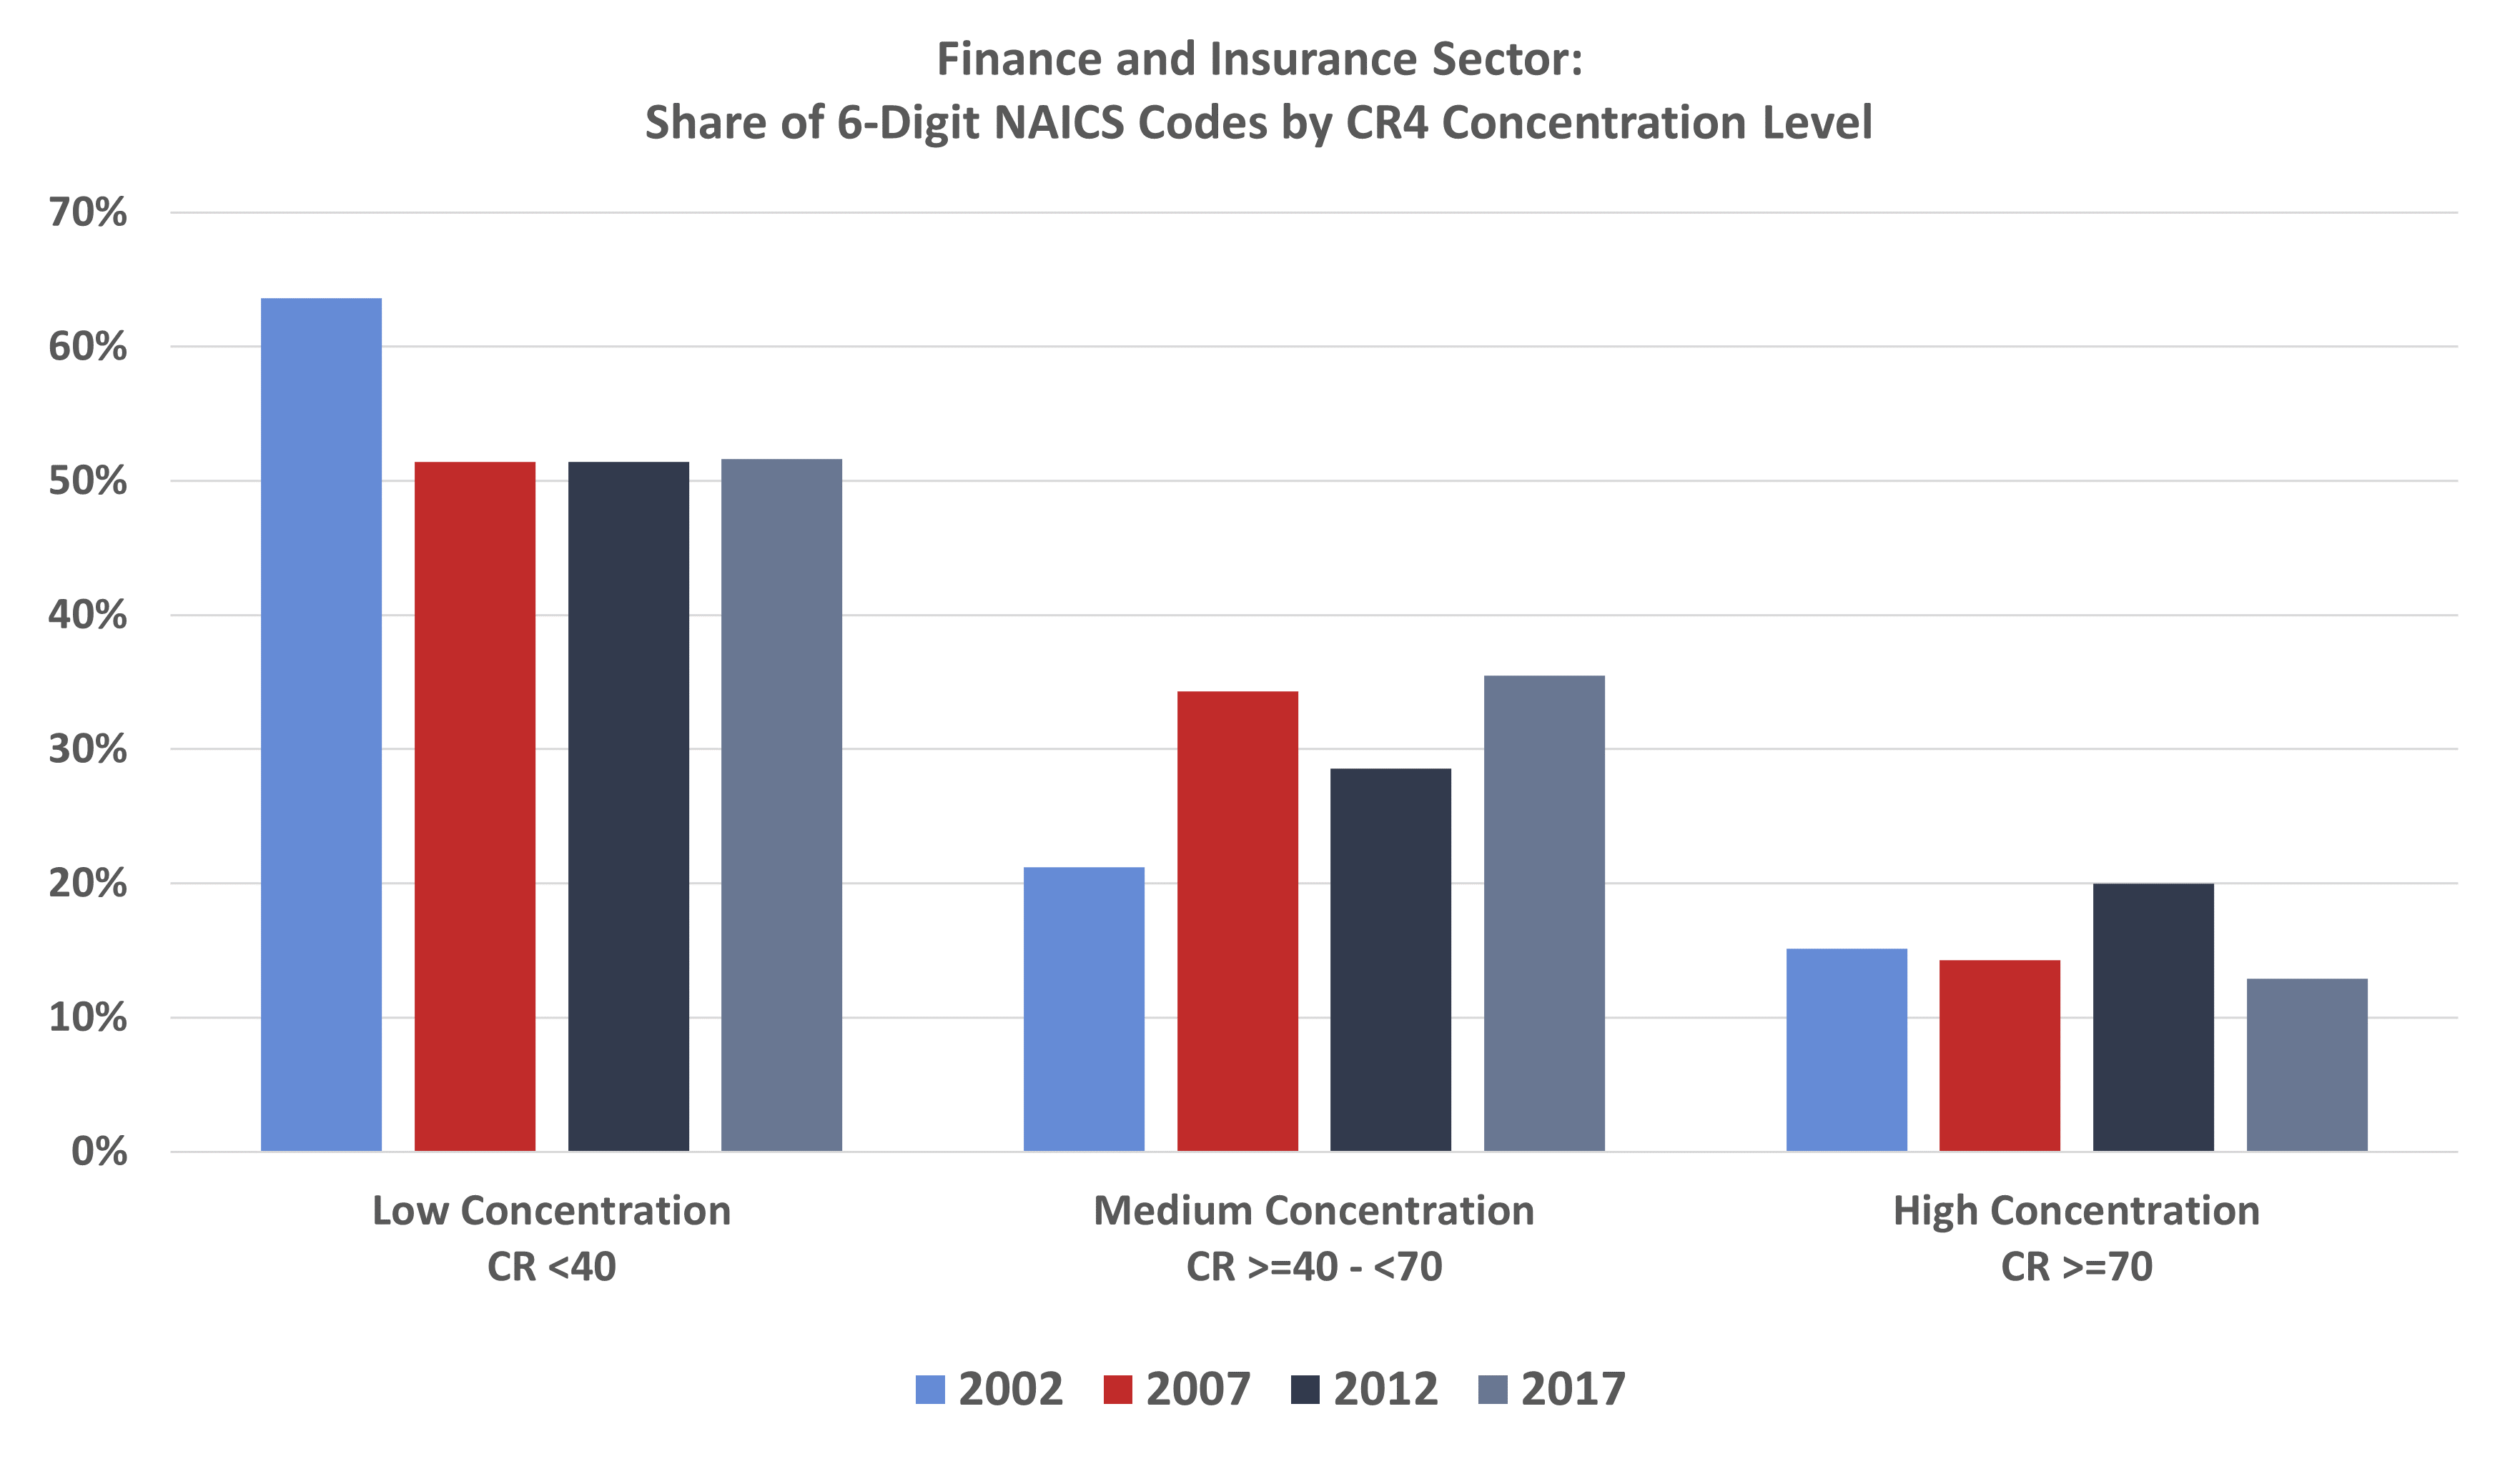 Finance and Insurance Sector: Share of 6-Digit NAICS Codes by CR4 Concentration Level